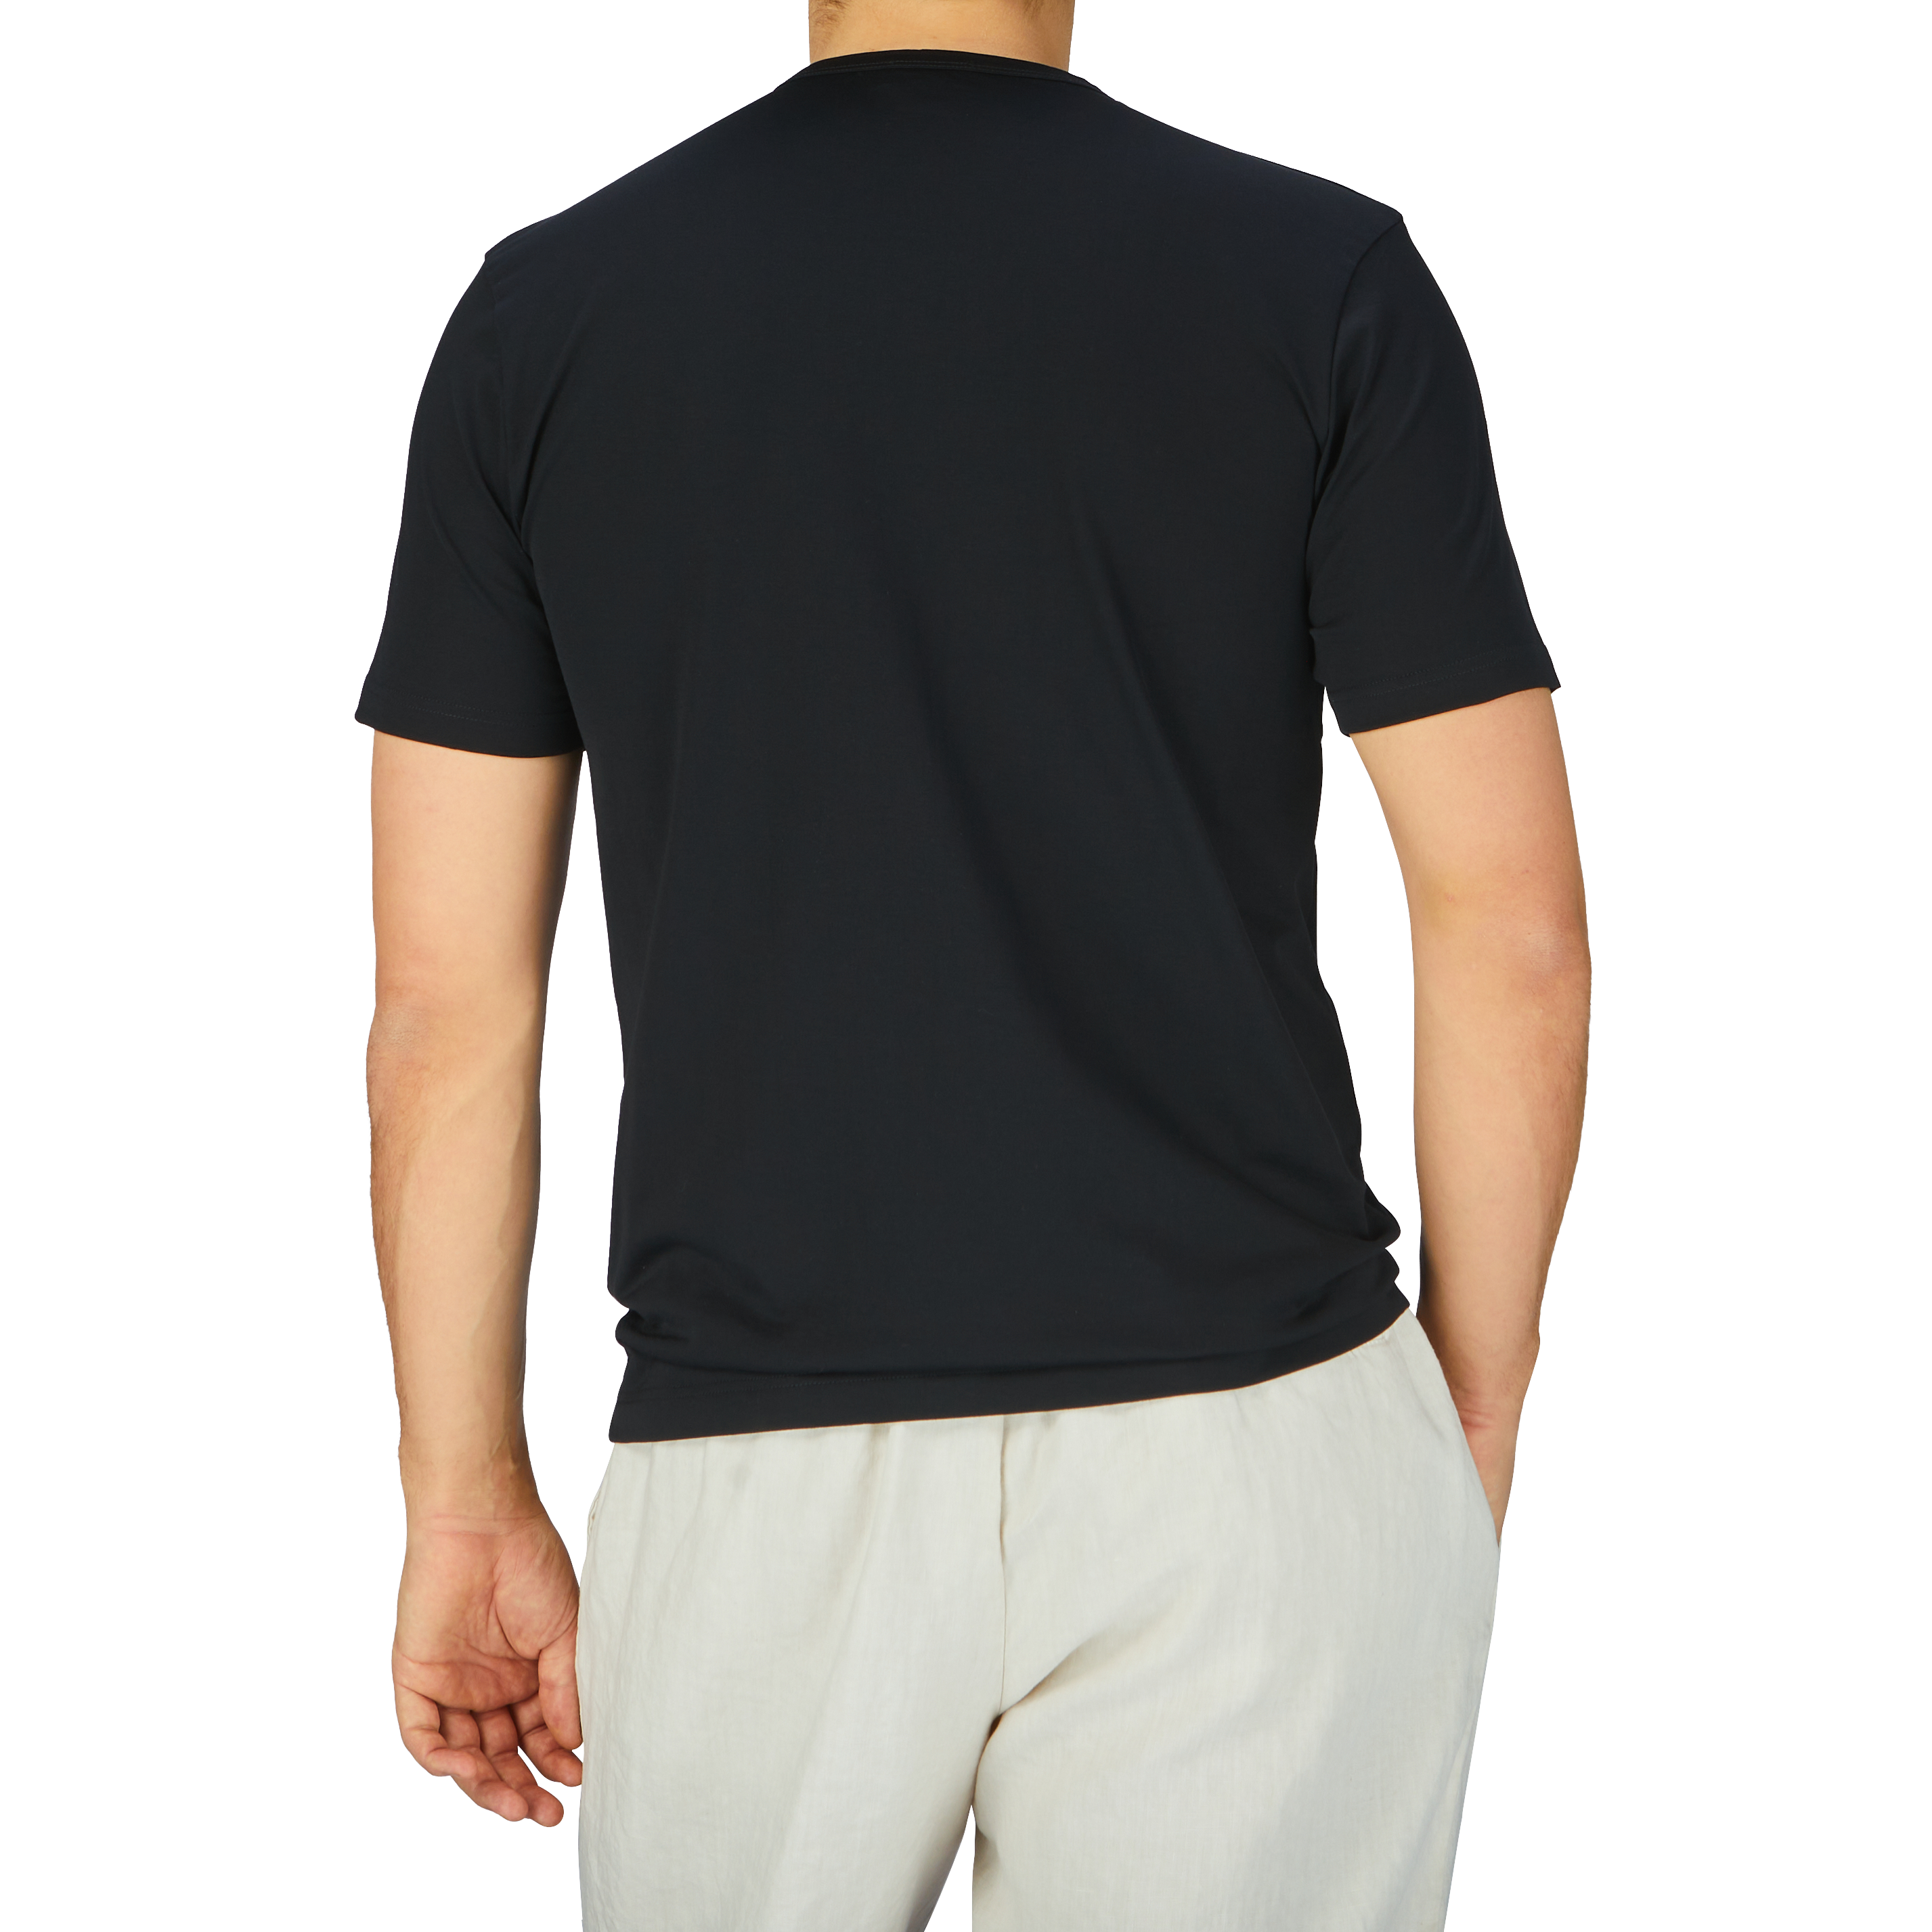 The man is wearing a Sunspel Black Classic Cotton T-Shirt.